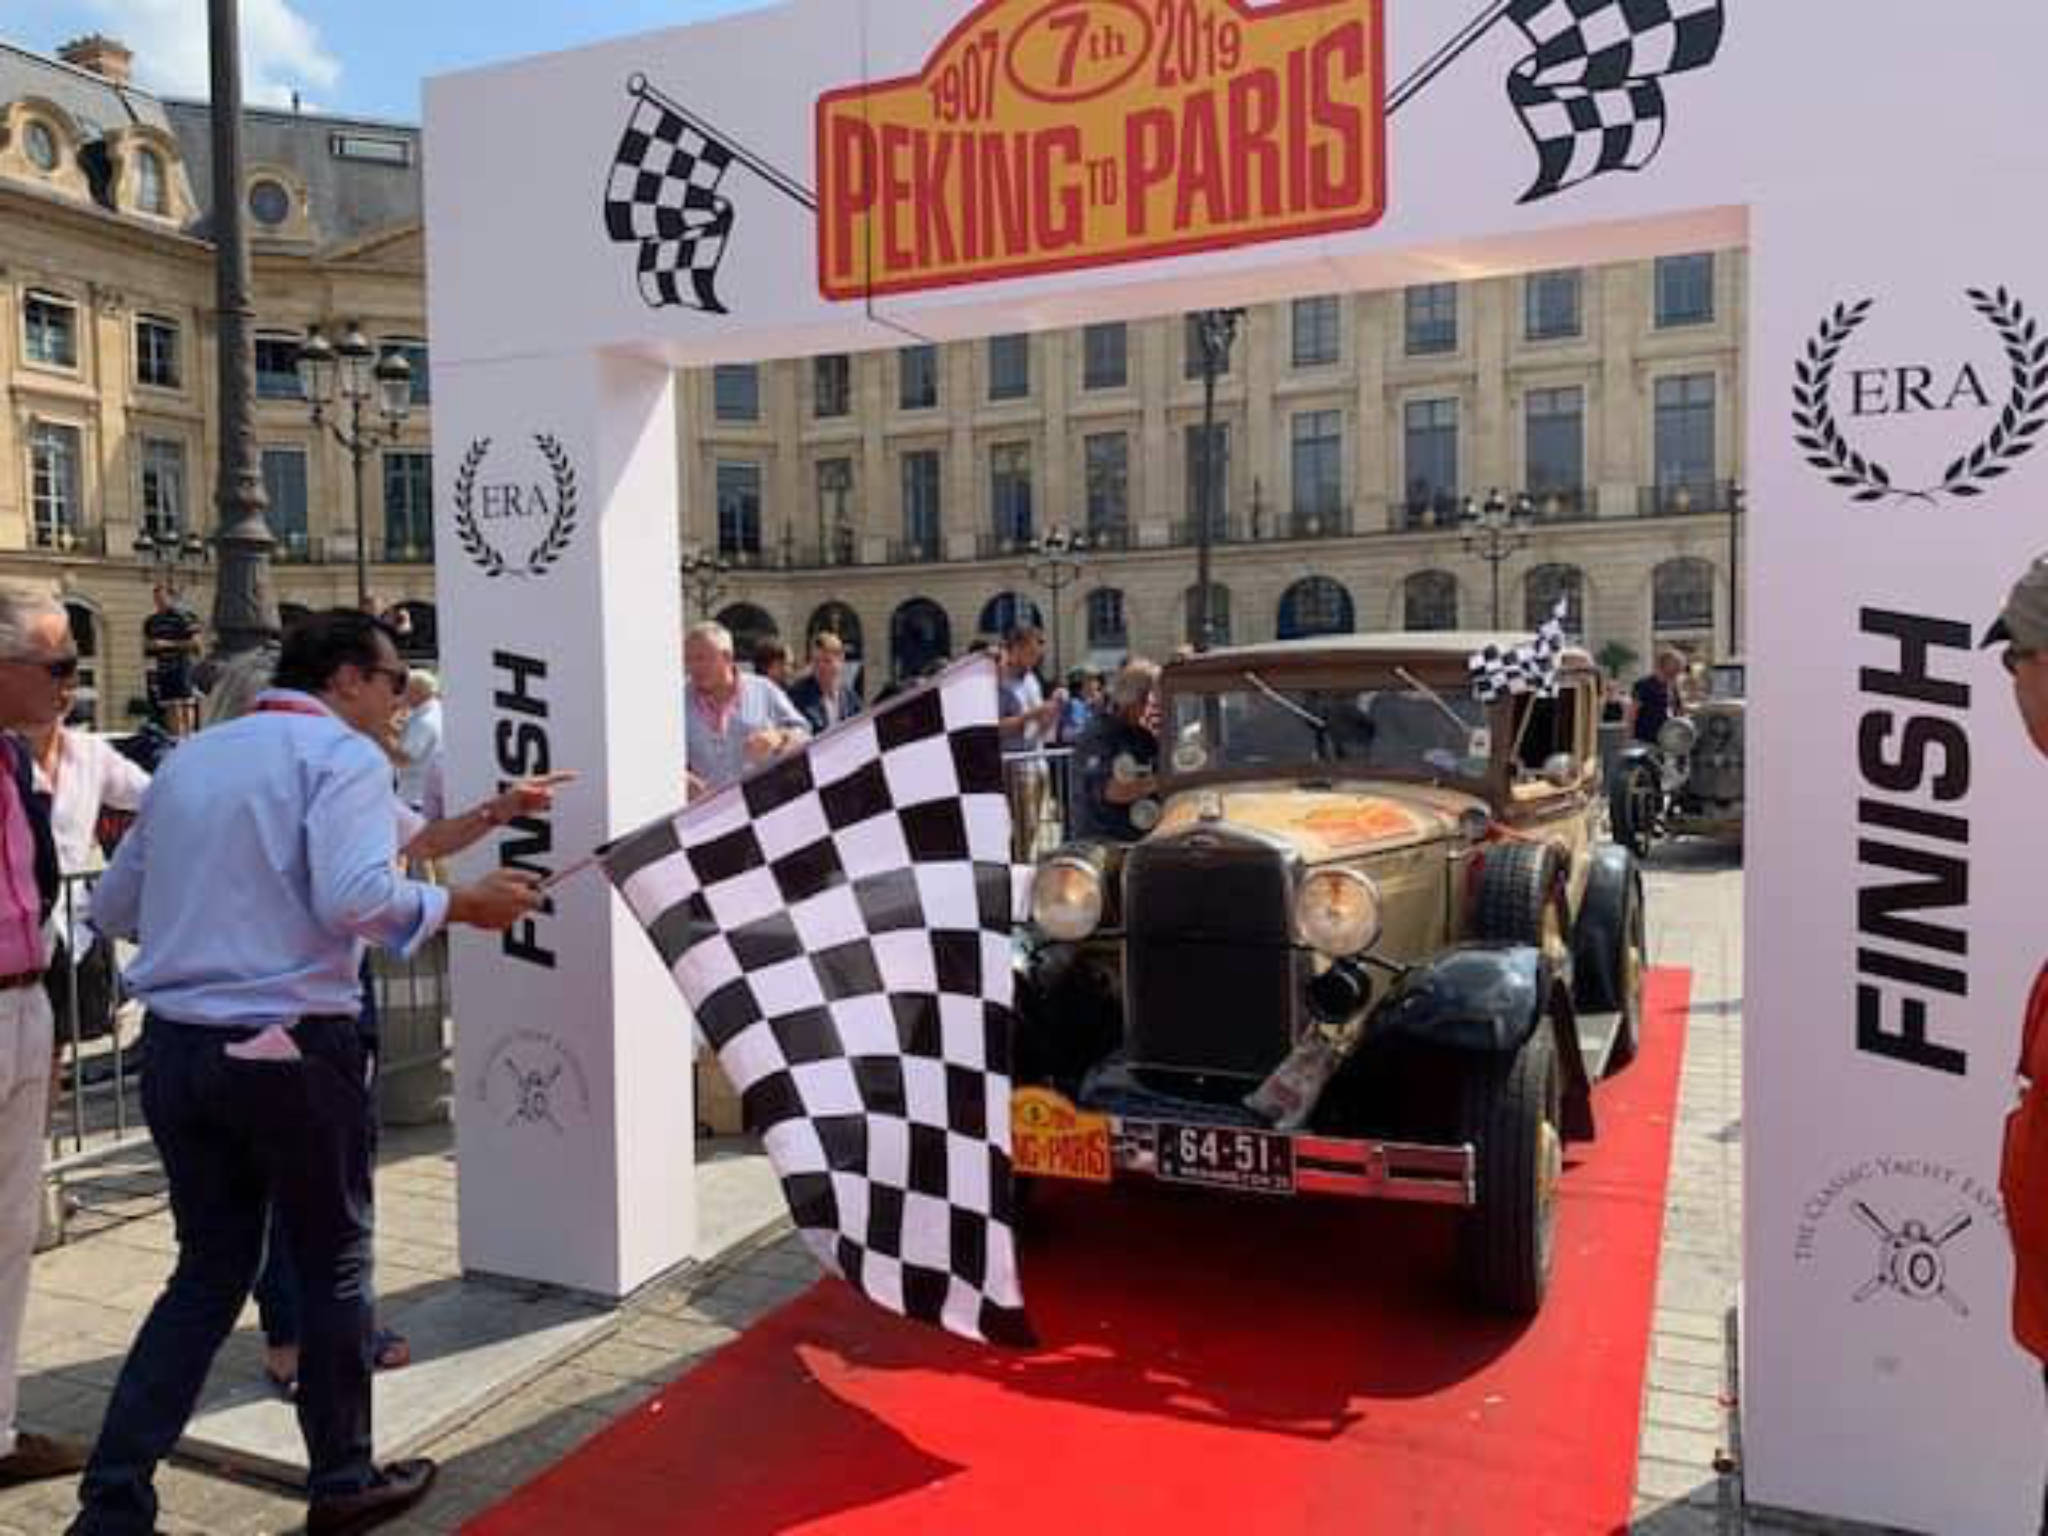 Vintage finish: Arlington doc, Rotarian triumphs in Peking to Paris rally; raises funds to wipe out polio